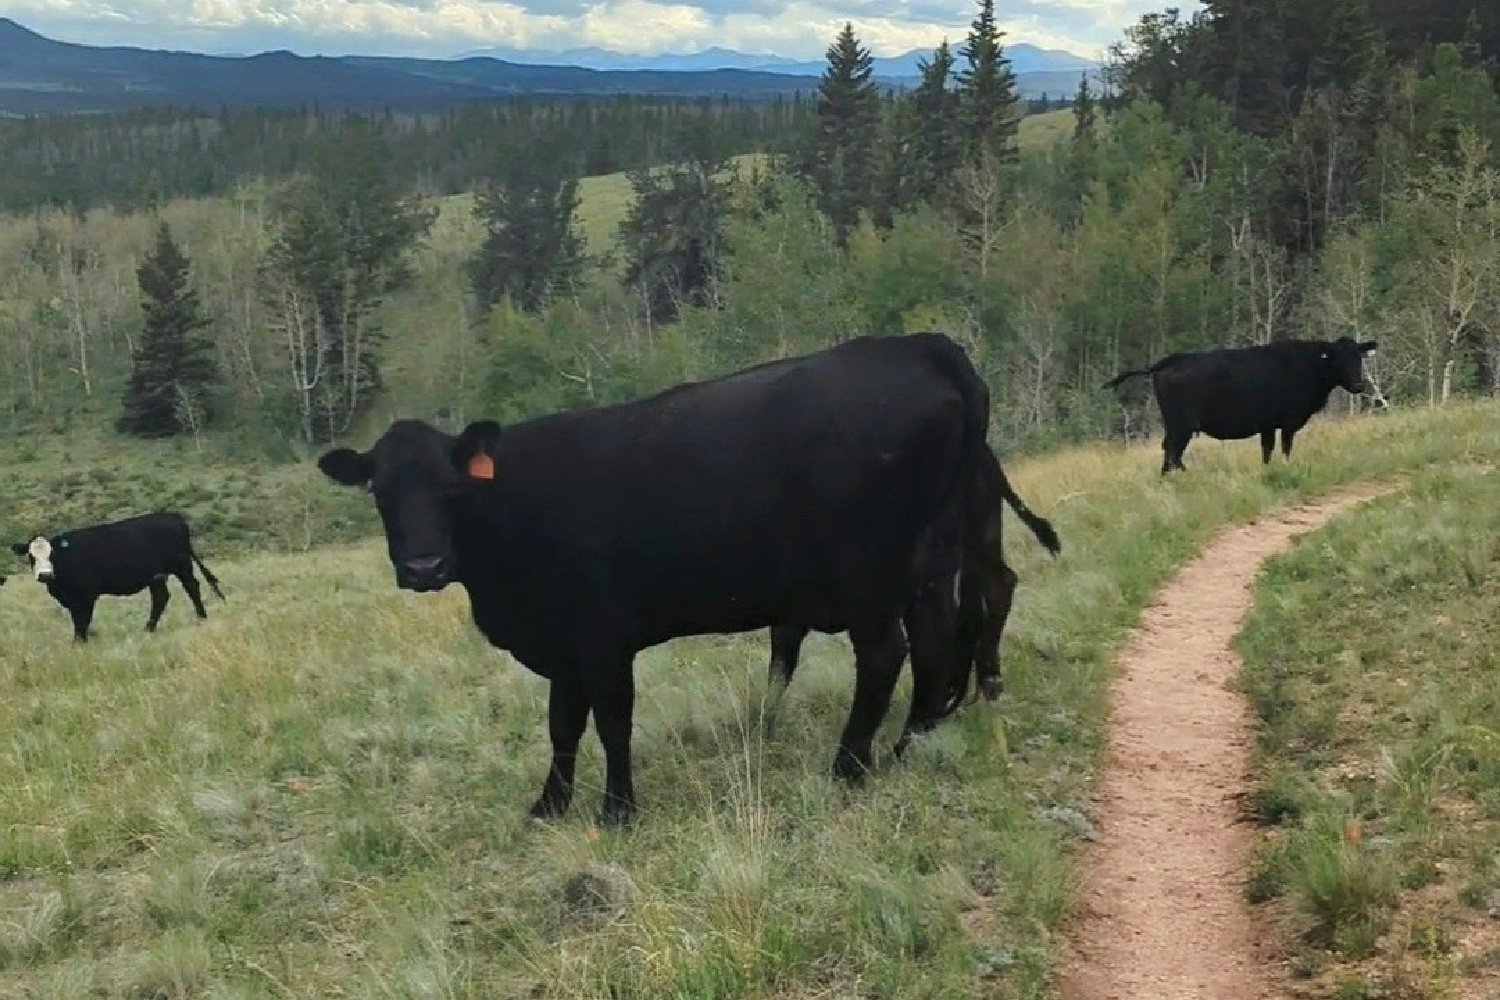 A group of cows standing next to a trail